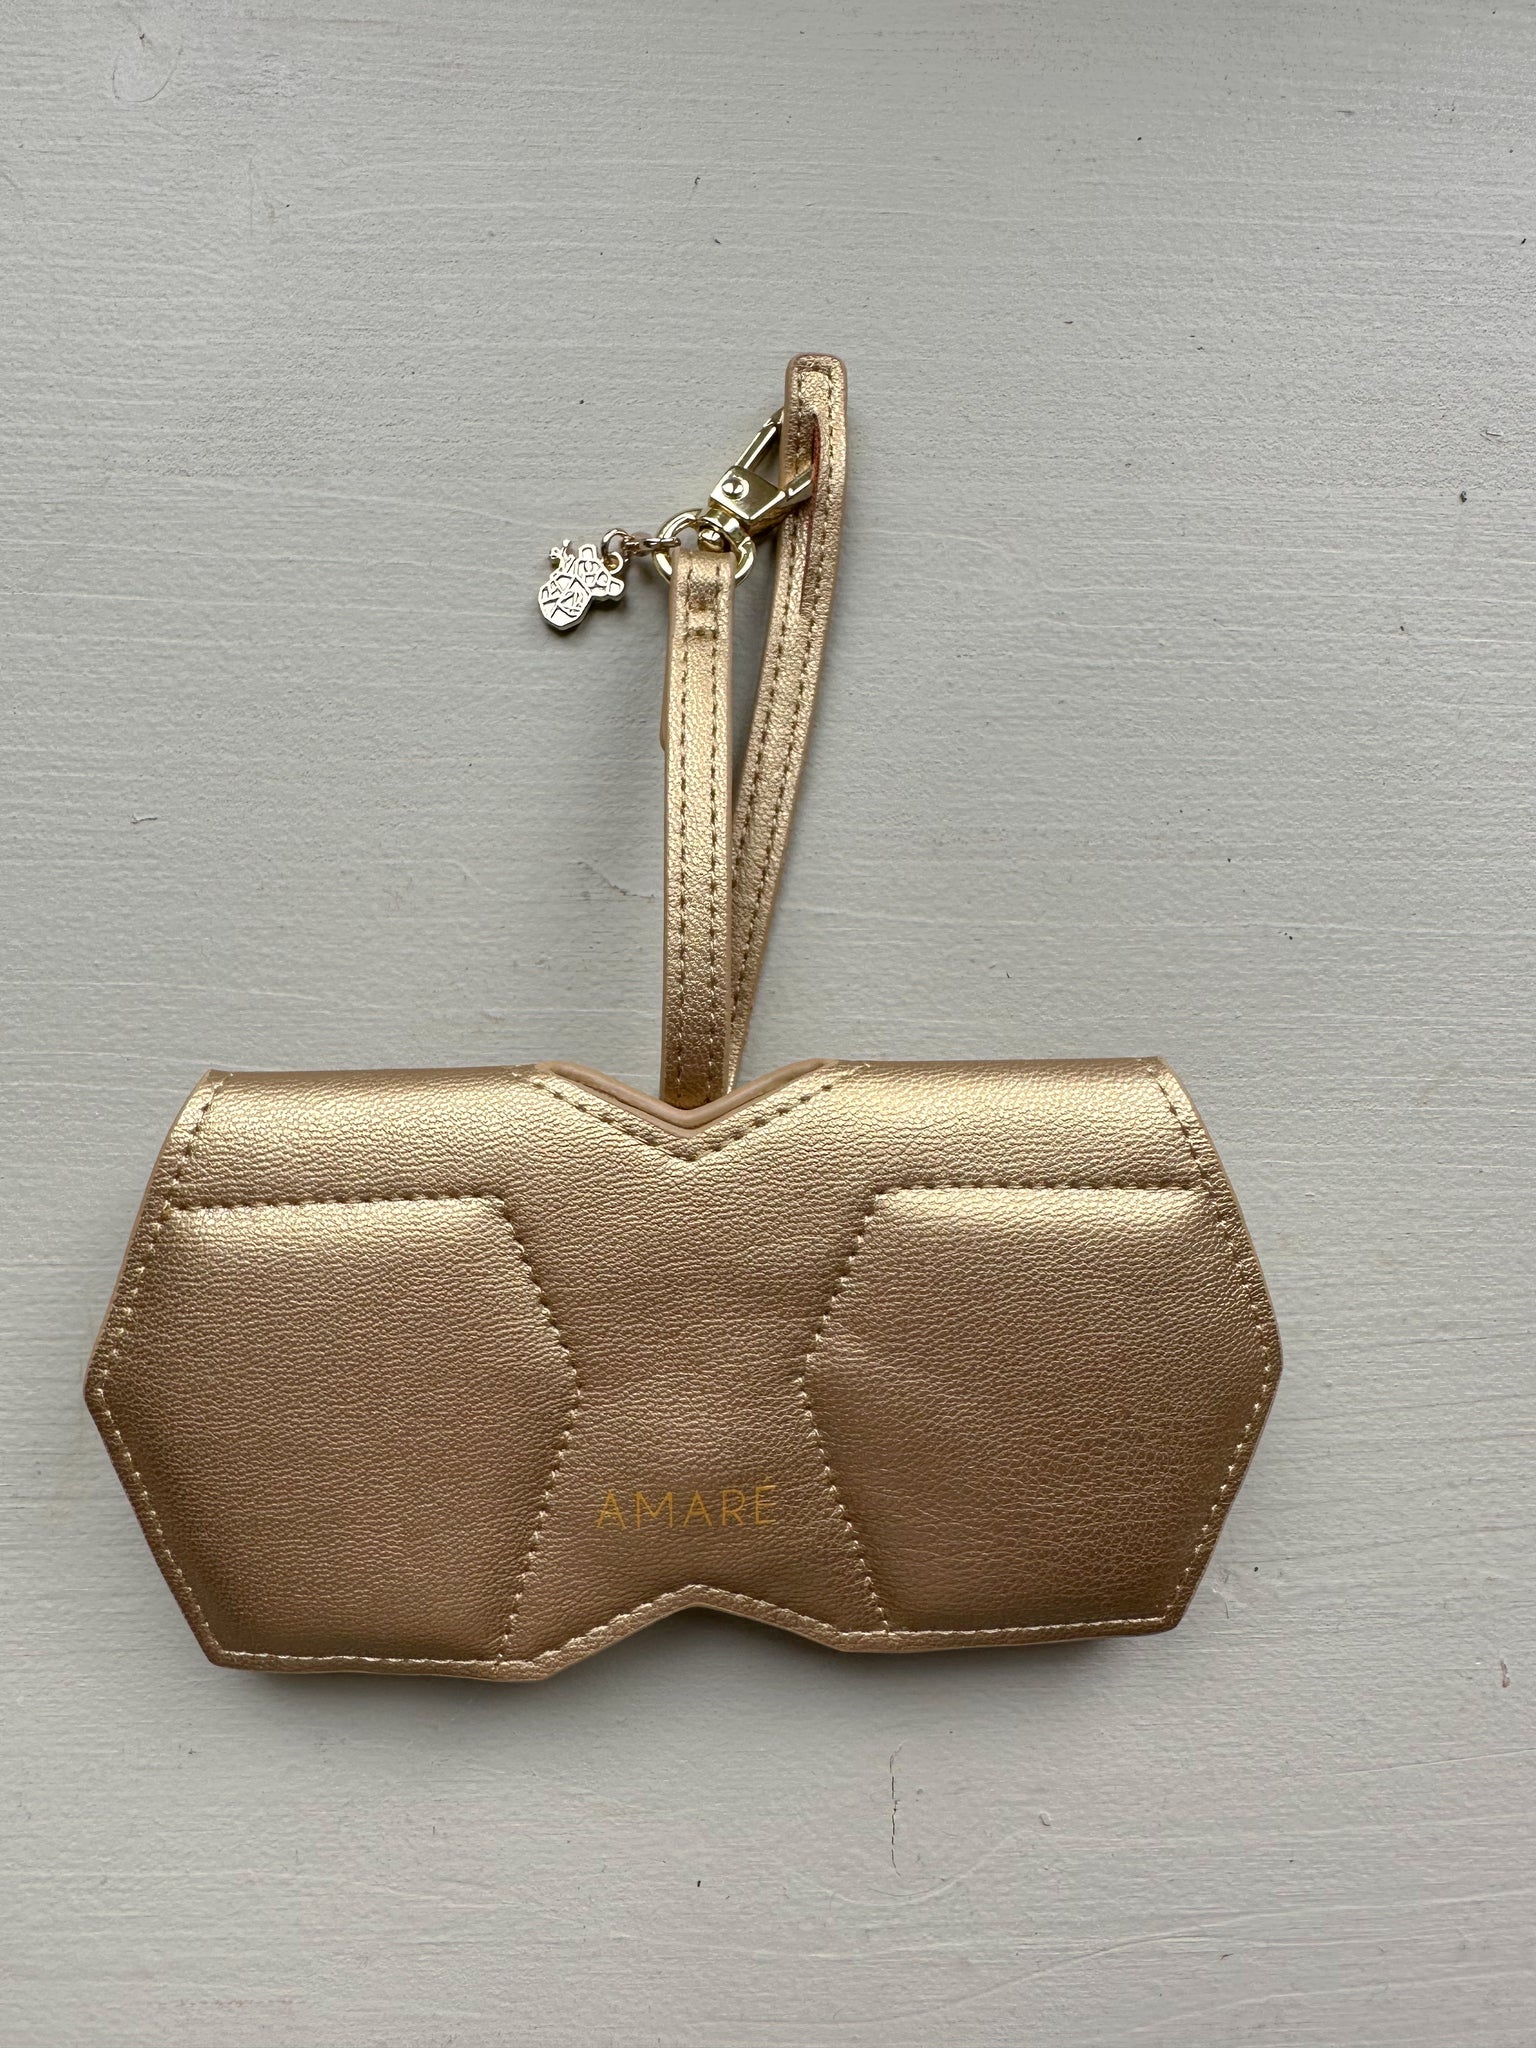 Sunglass cover made from Apple Waste